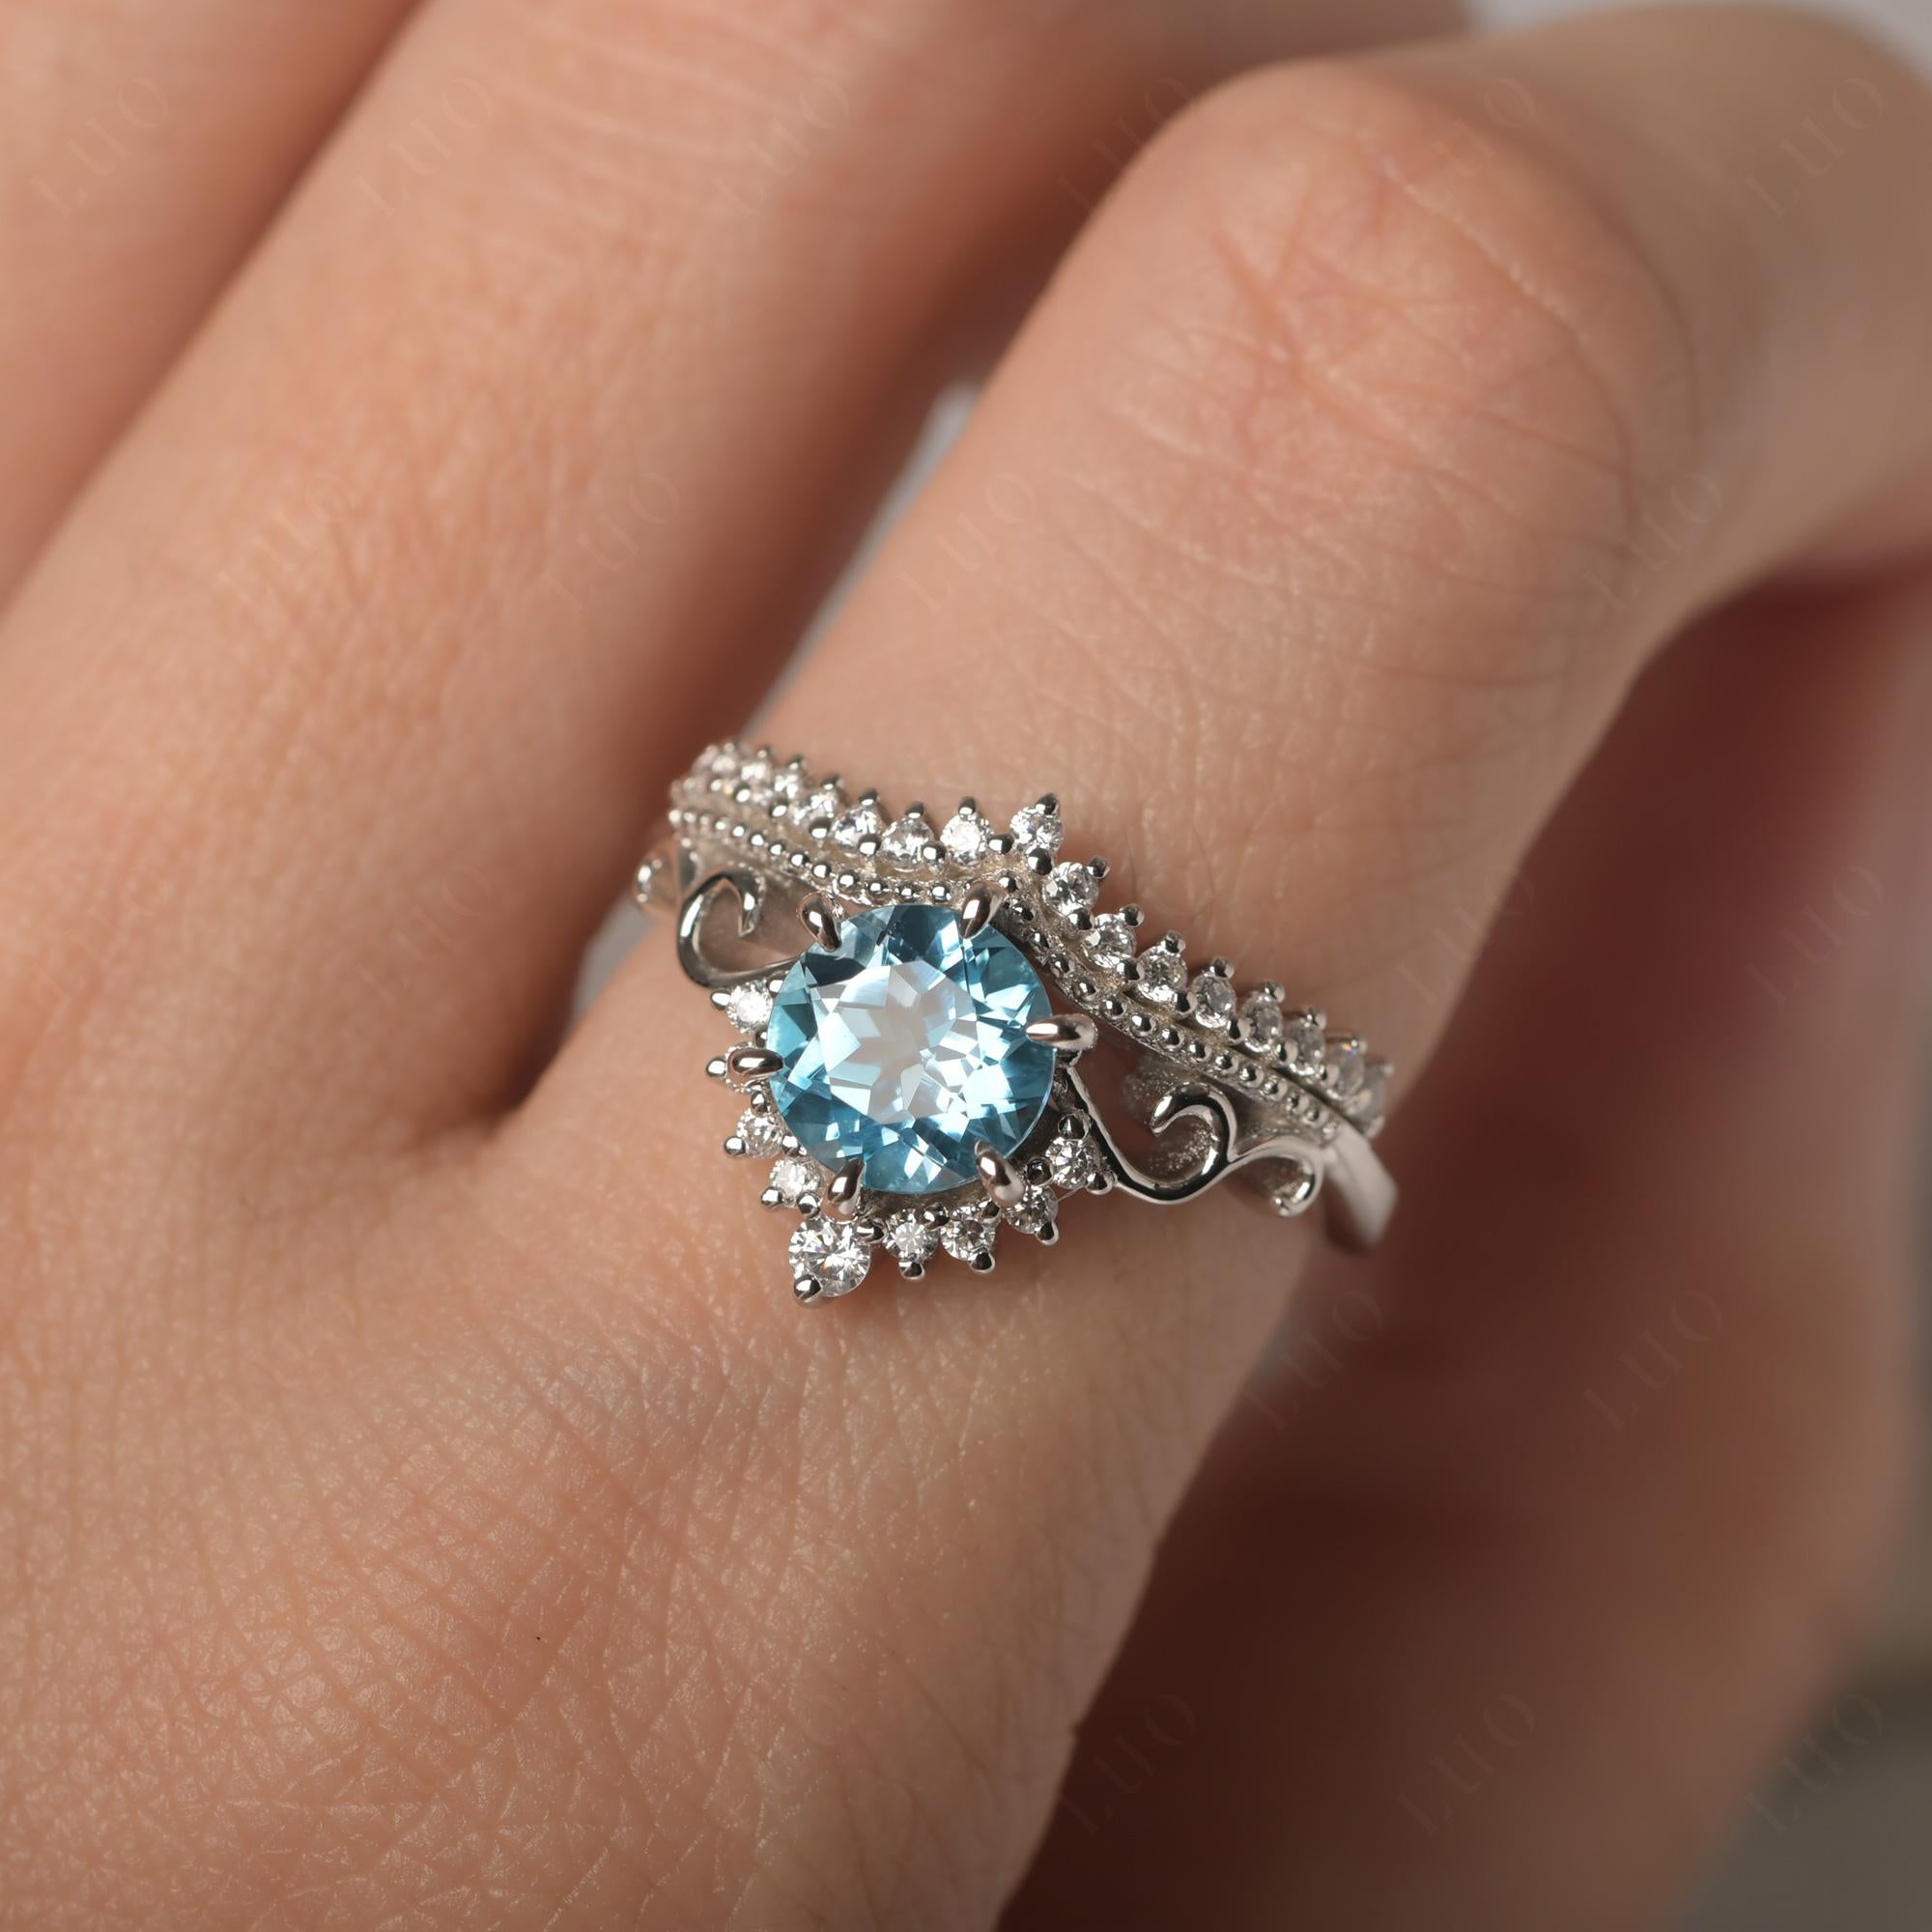 Vintage Swiss Blue Topaz Cocktail Ring - LUO Jewelry